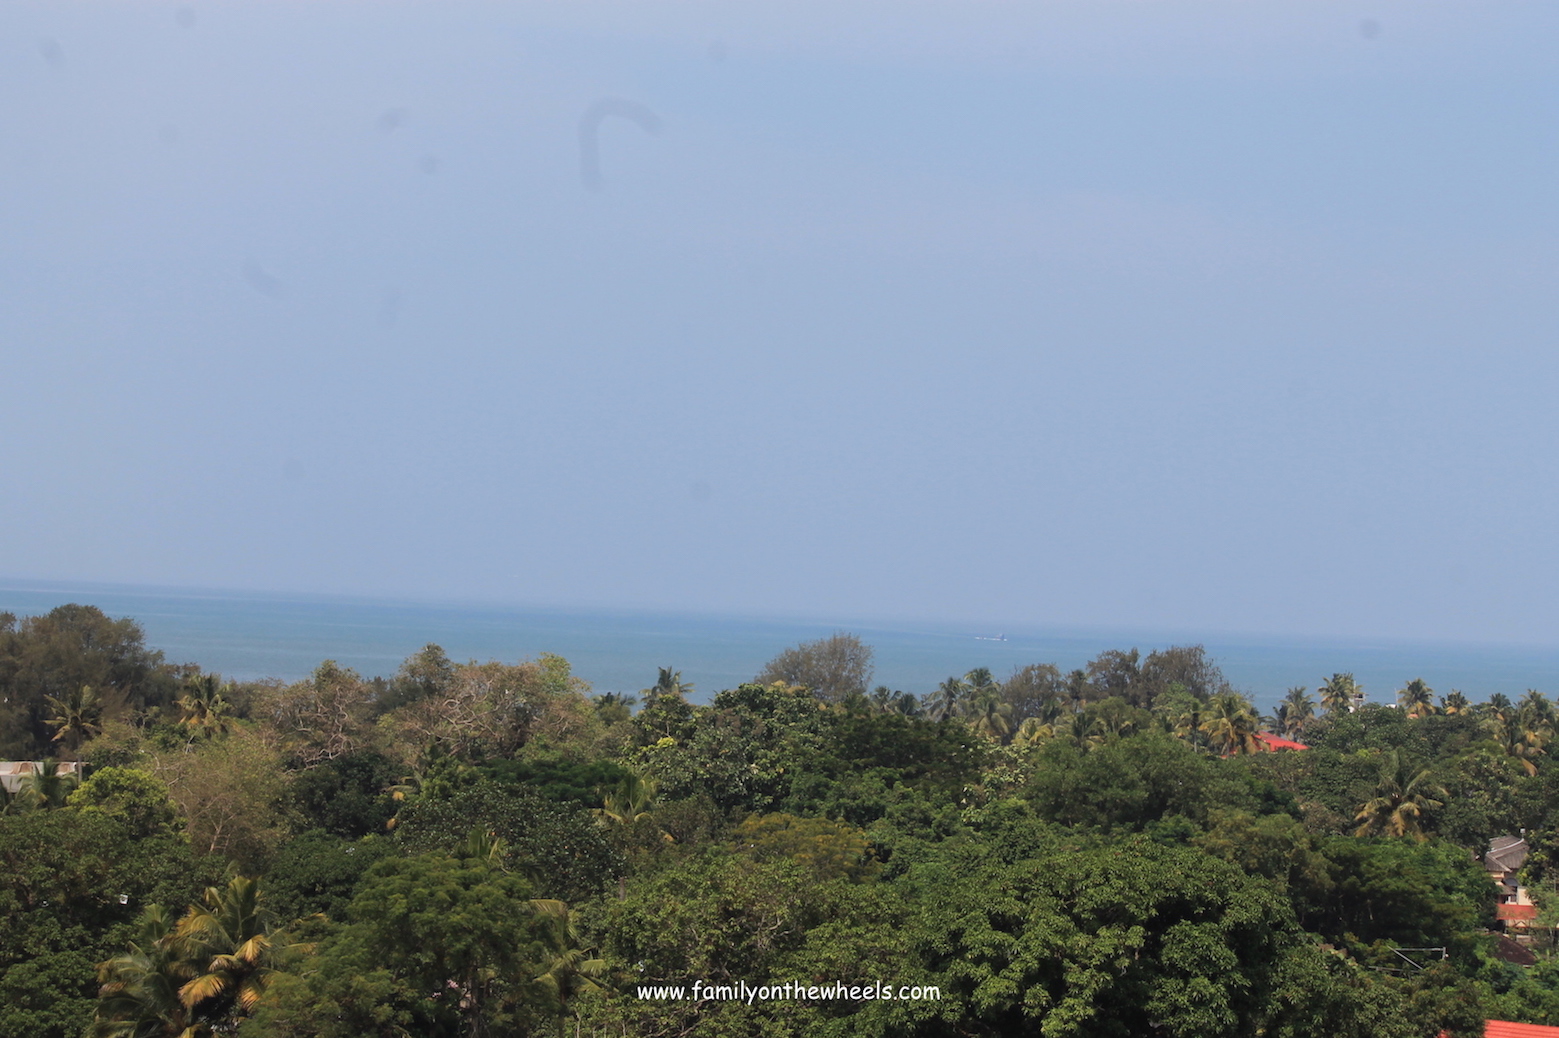 Alleppey view from Alappuzha lighthouse - #canals #Kerala #alleppey #backwaters #keralabackwaters #sunset #beaches #naturelover #sun #lighthouse #seaview